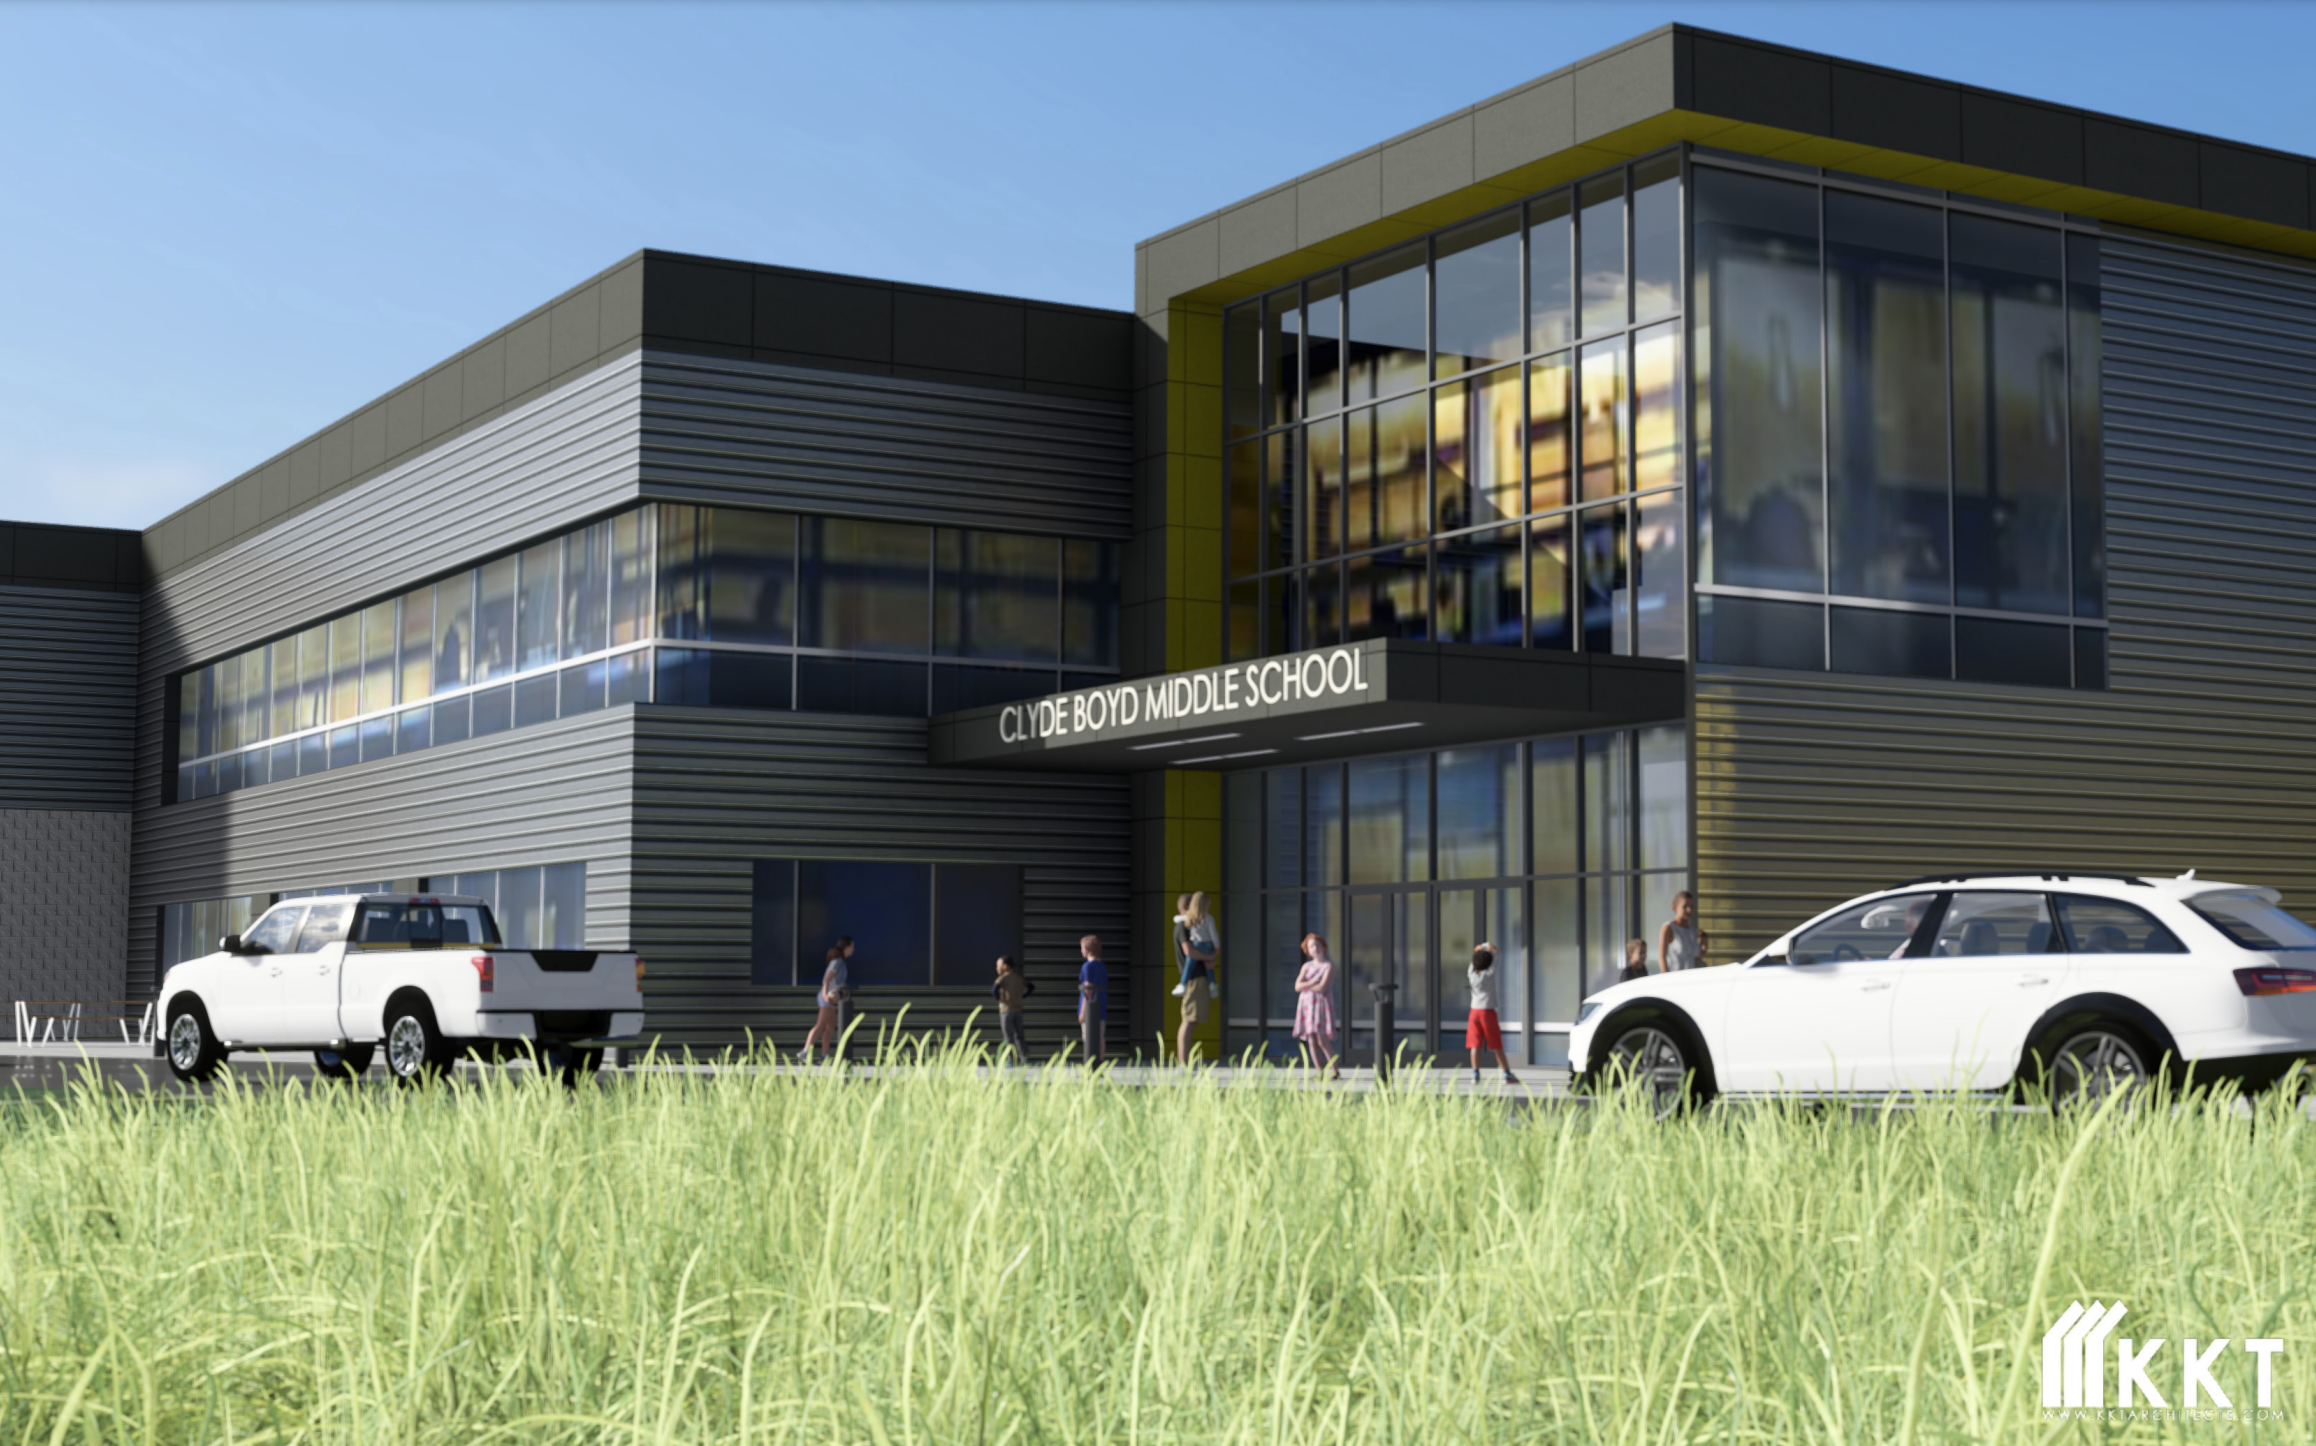 Rendering of proposed Clyde Boyd Middle School Building. Green grass, white car in front of a gray building with the text Clyde Boyd Middle School